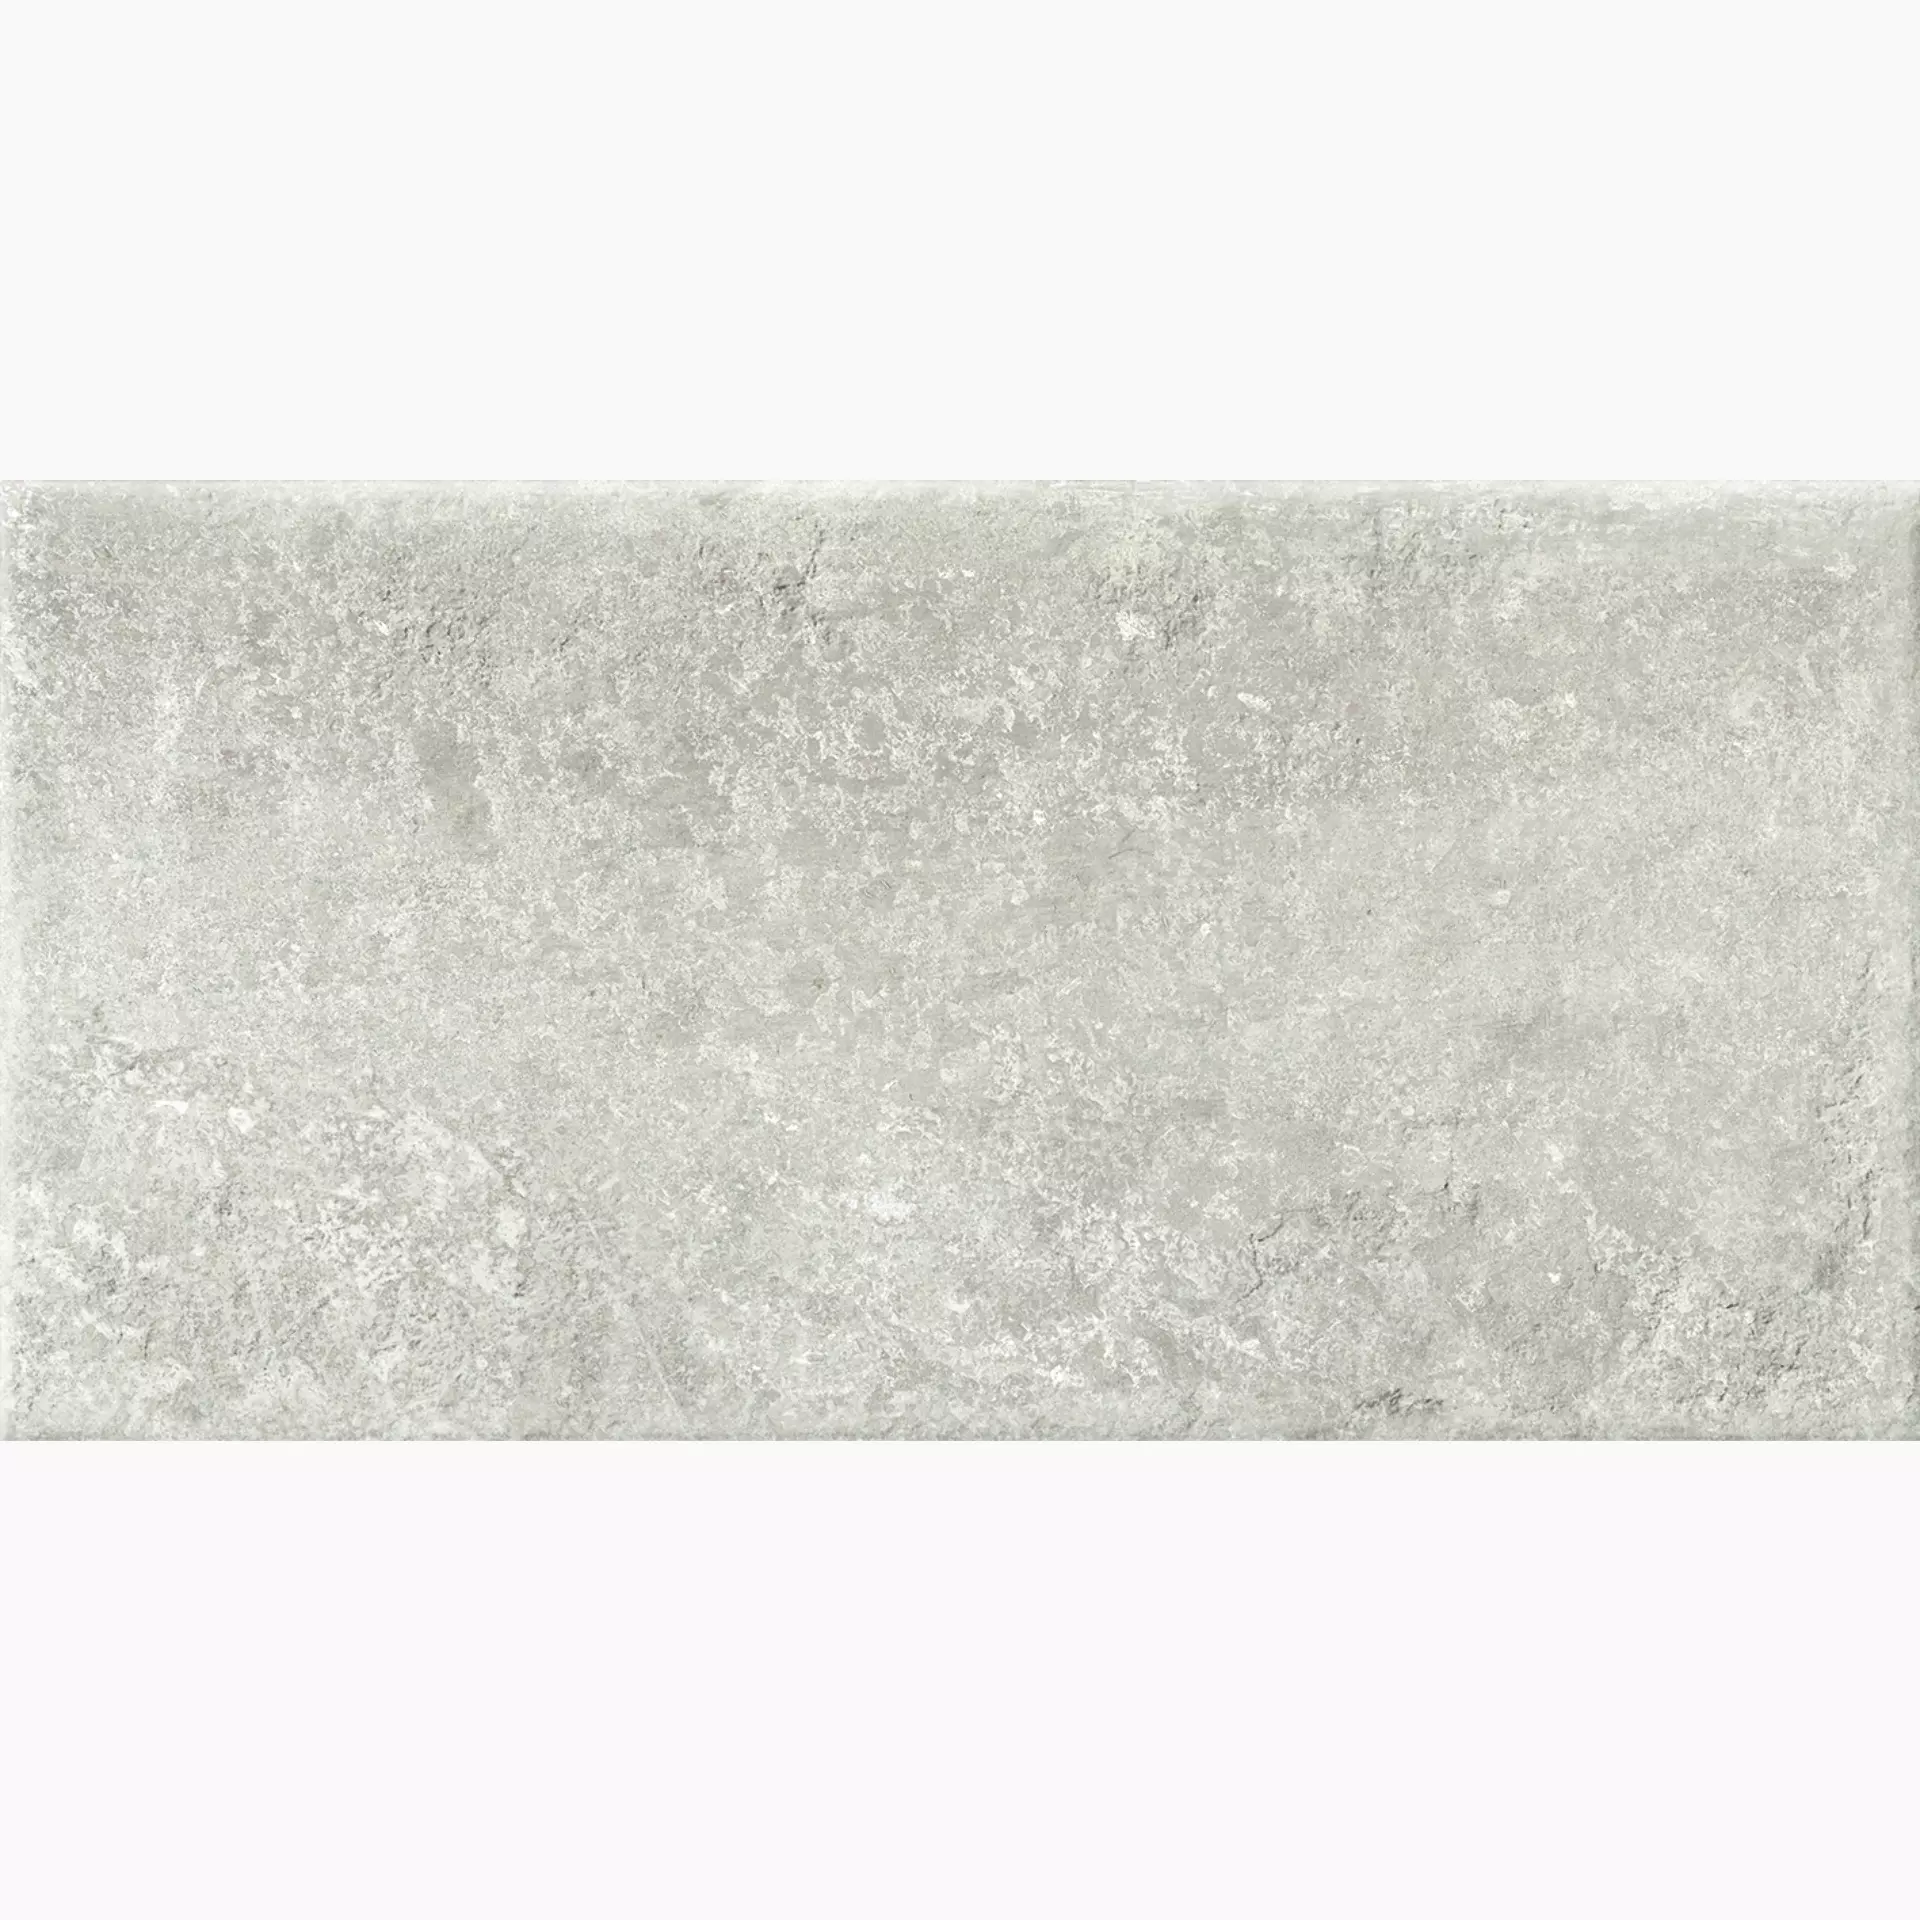 Emilceramica Chateau Beige Naturale EFLY 30x60cm rectified 9,5mm